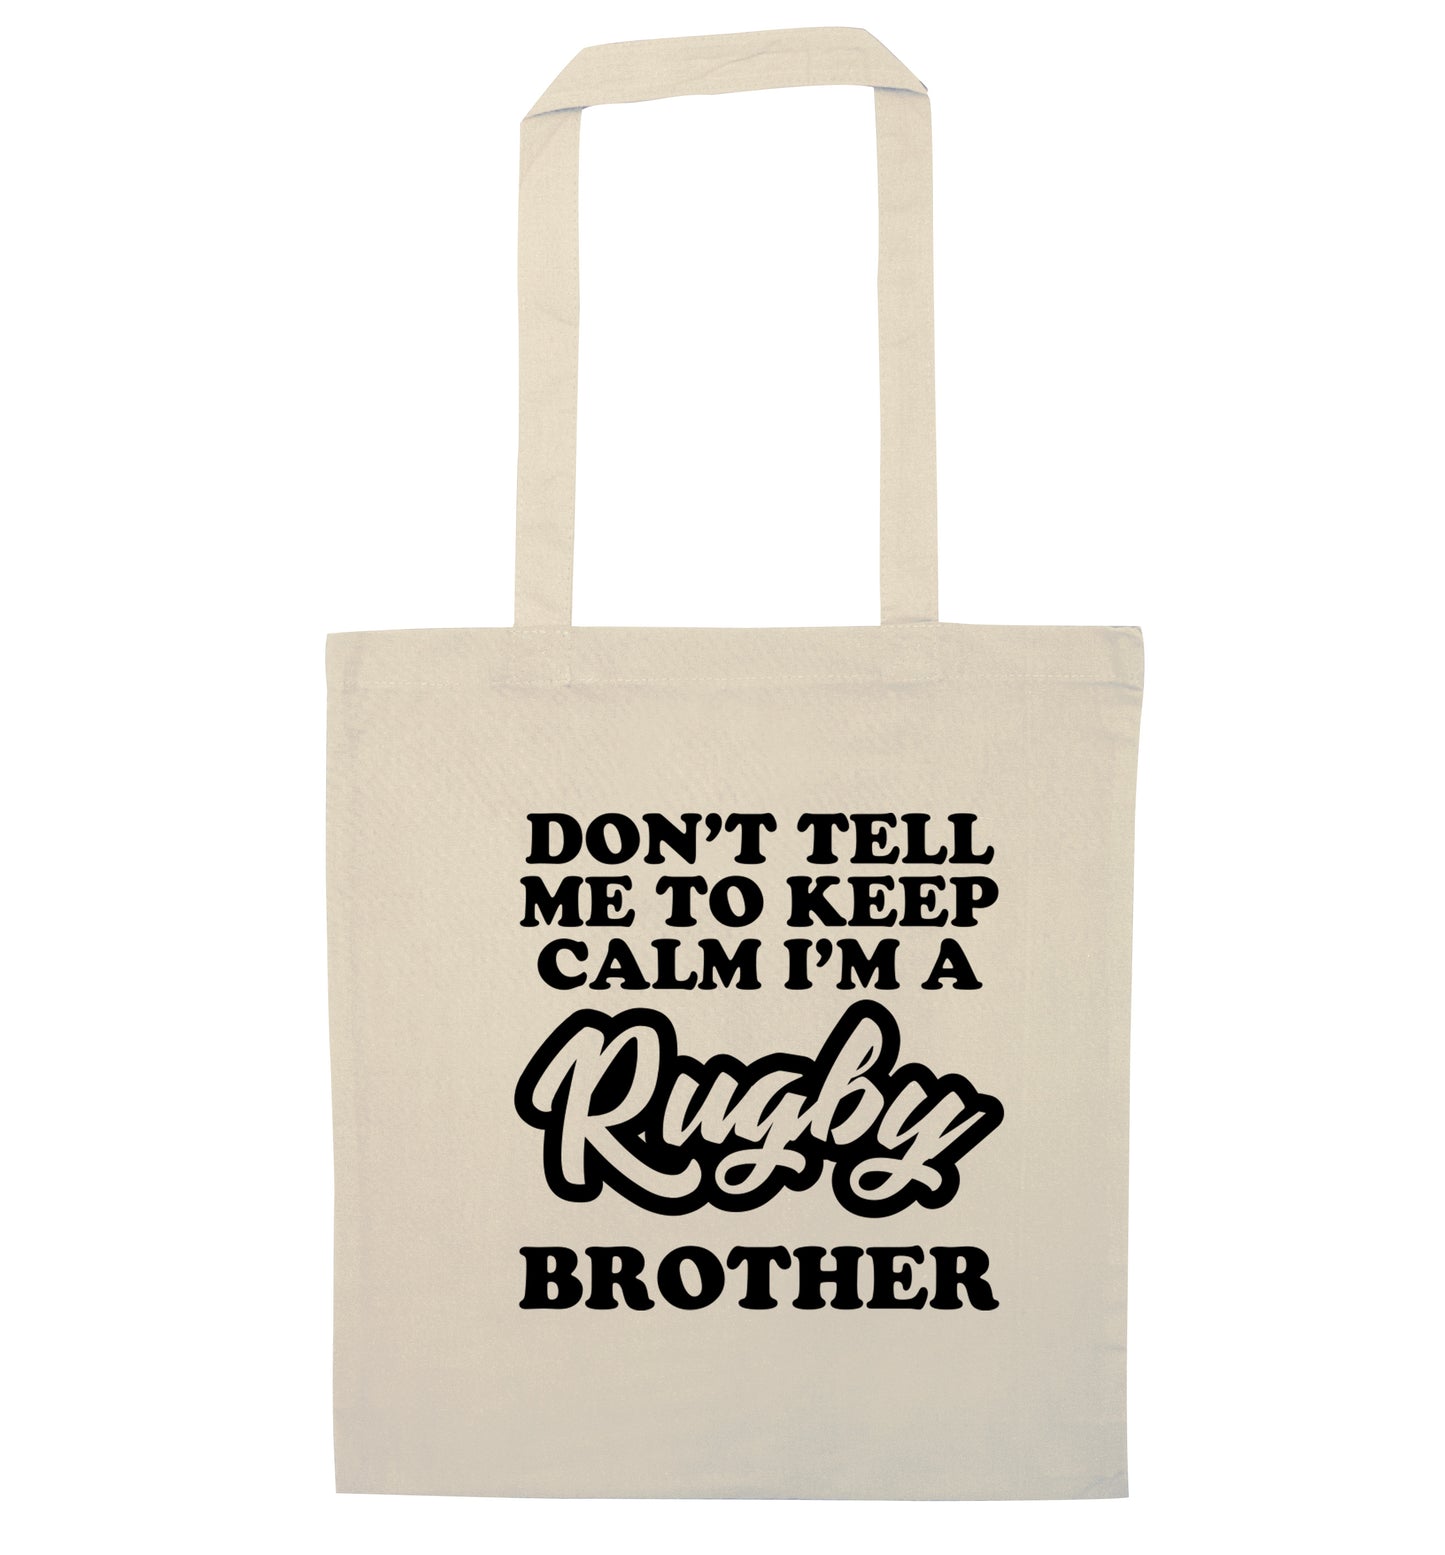 Don't tell me keep calm I'm a rugby brother natural tote bag